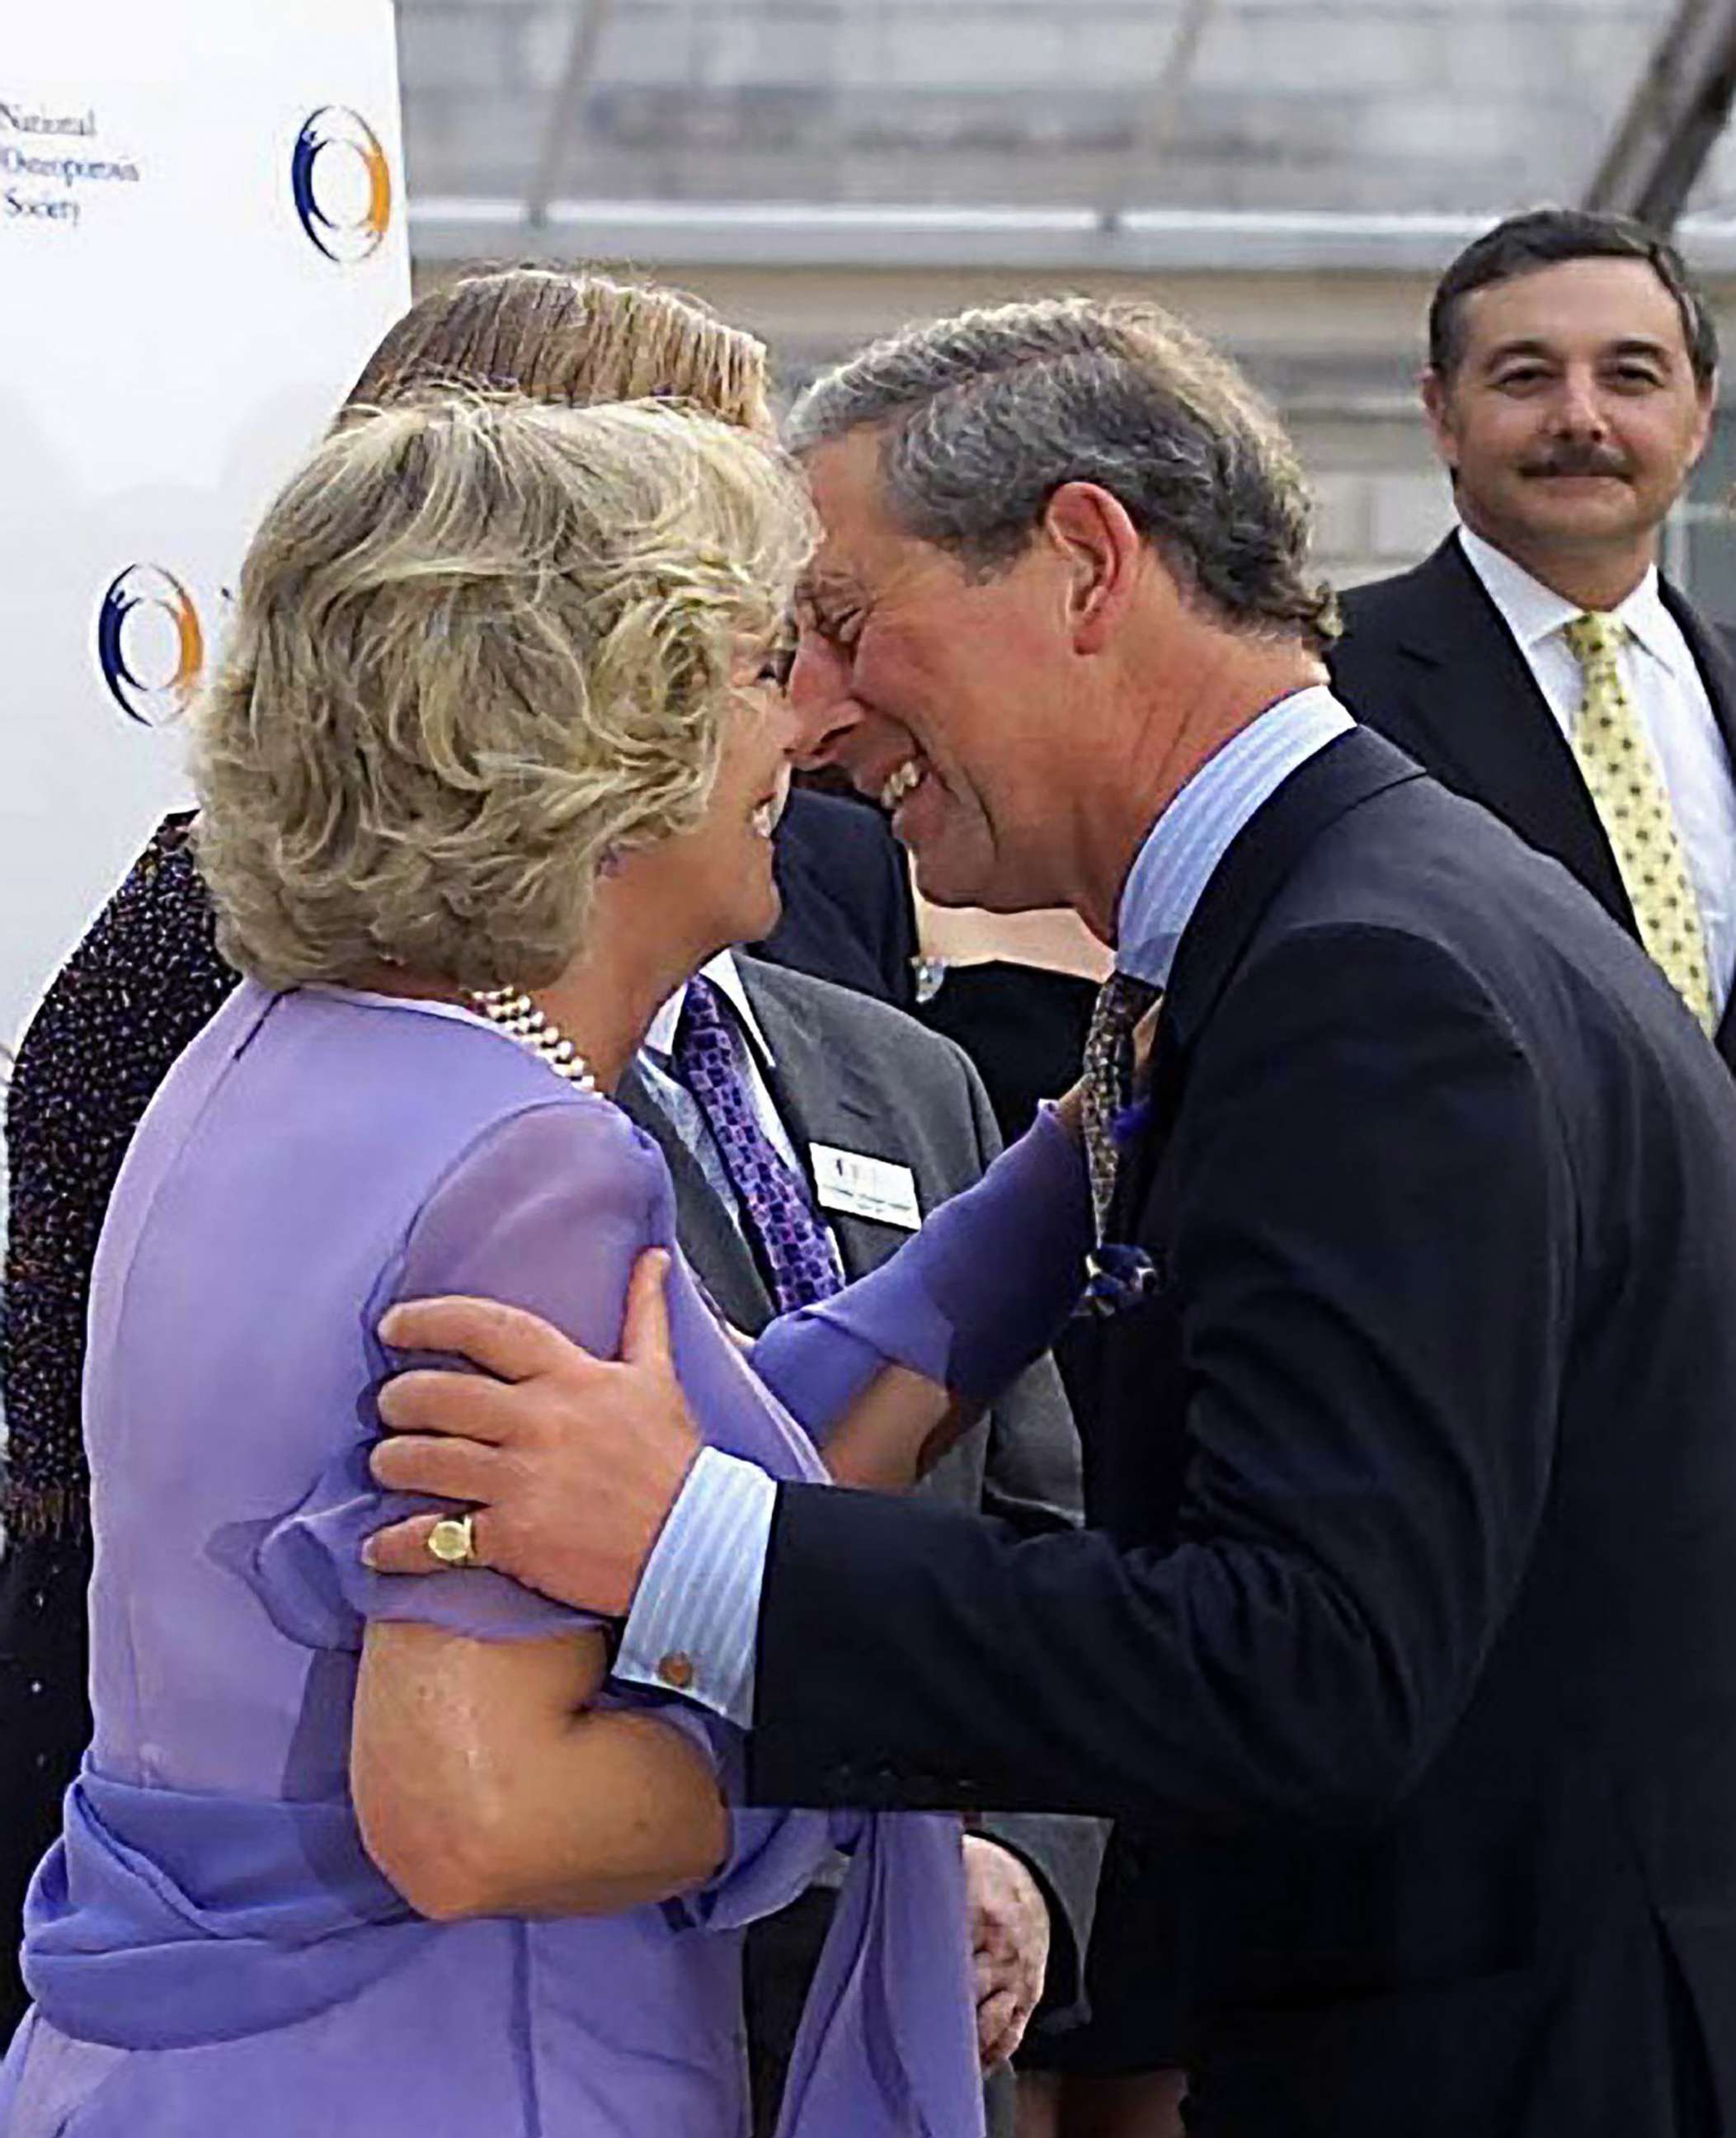 PHOTO: Camilla Parker-Bowles, in her official role as patron of the National Osteoporosis Society, welcomes Prince Charles with a kiss to the anniversary event at Somerset House in London, June 26, 2001.